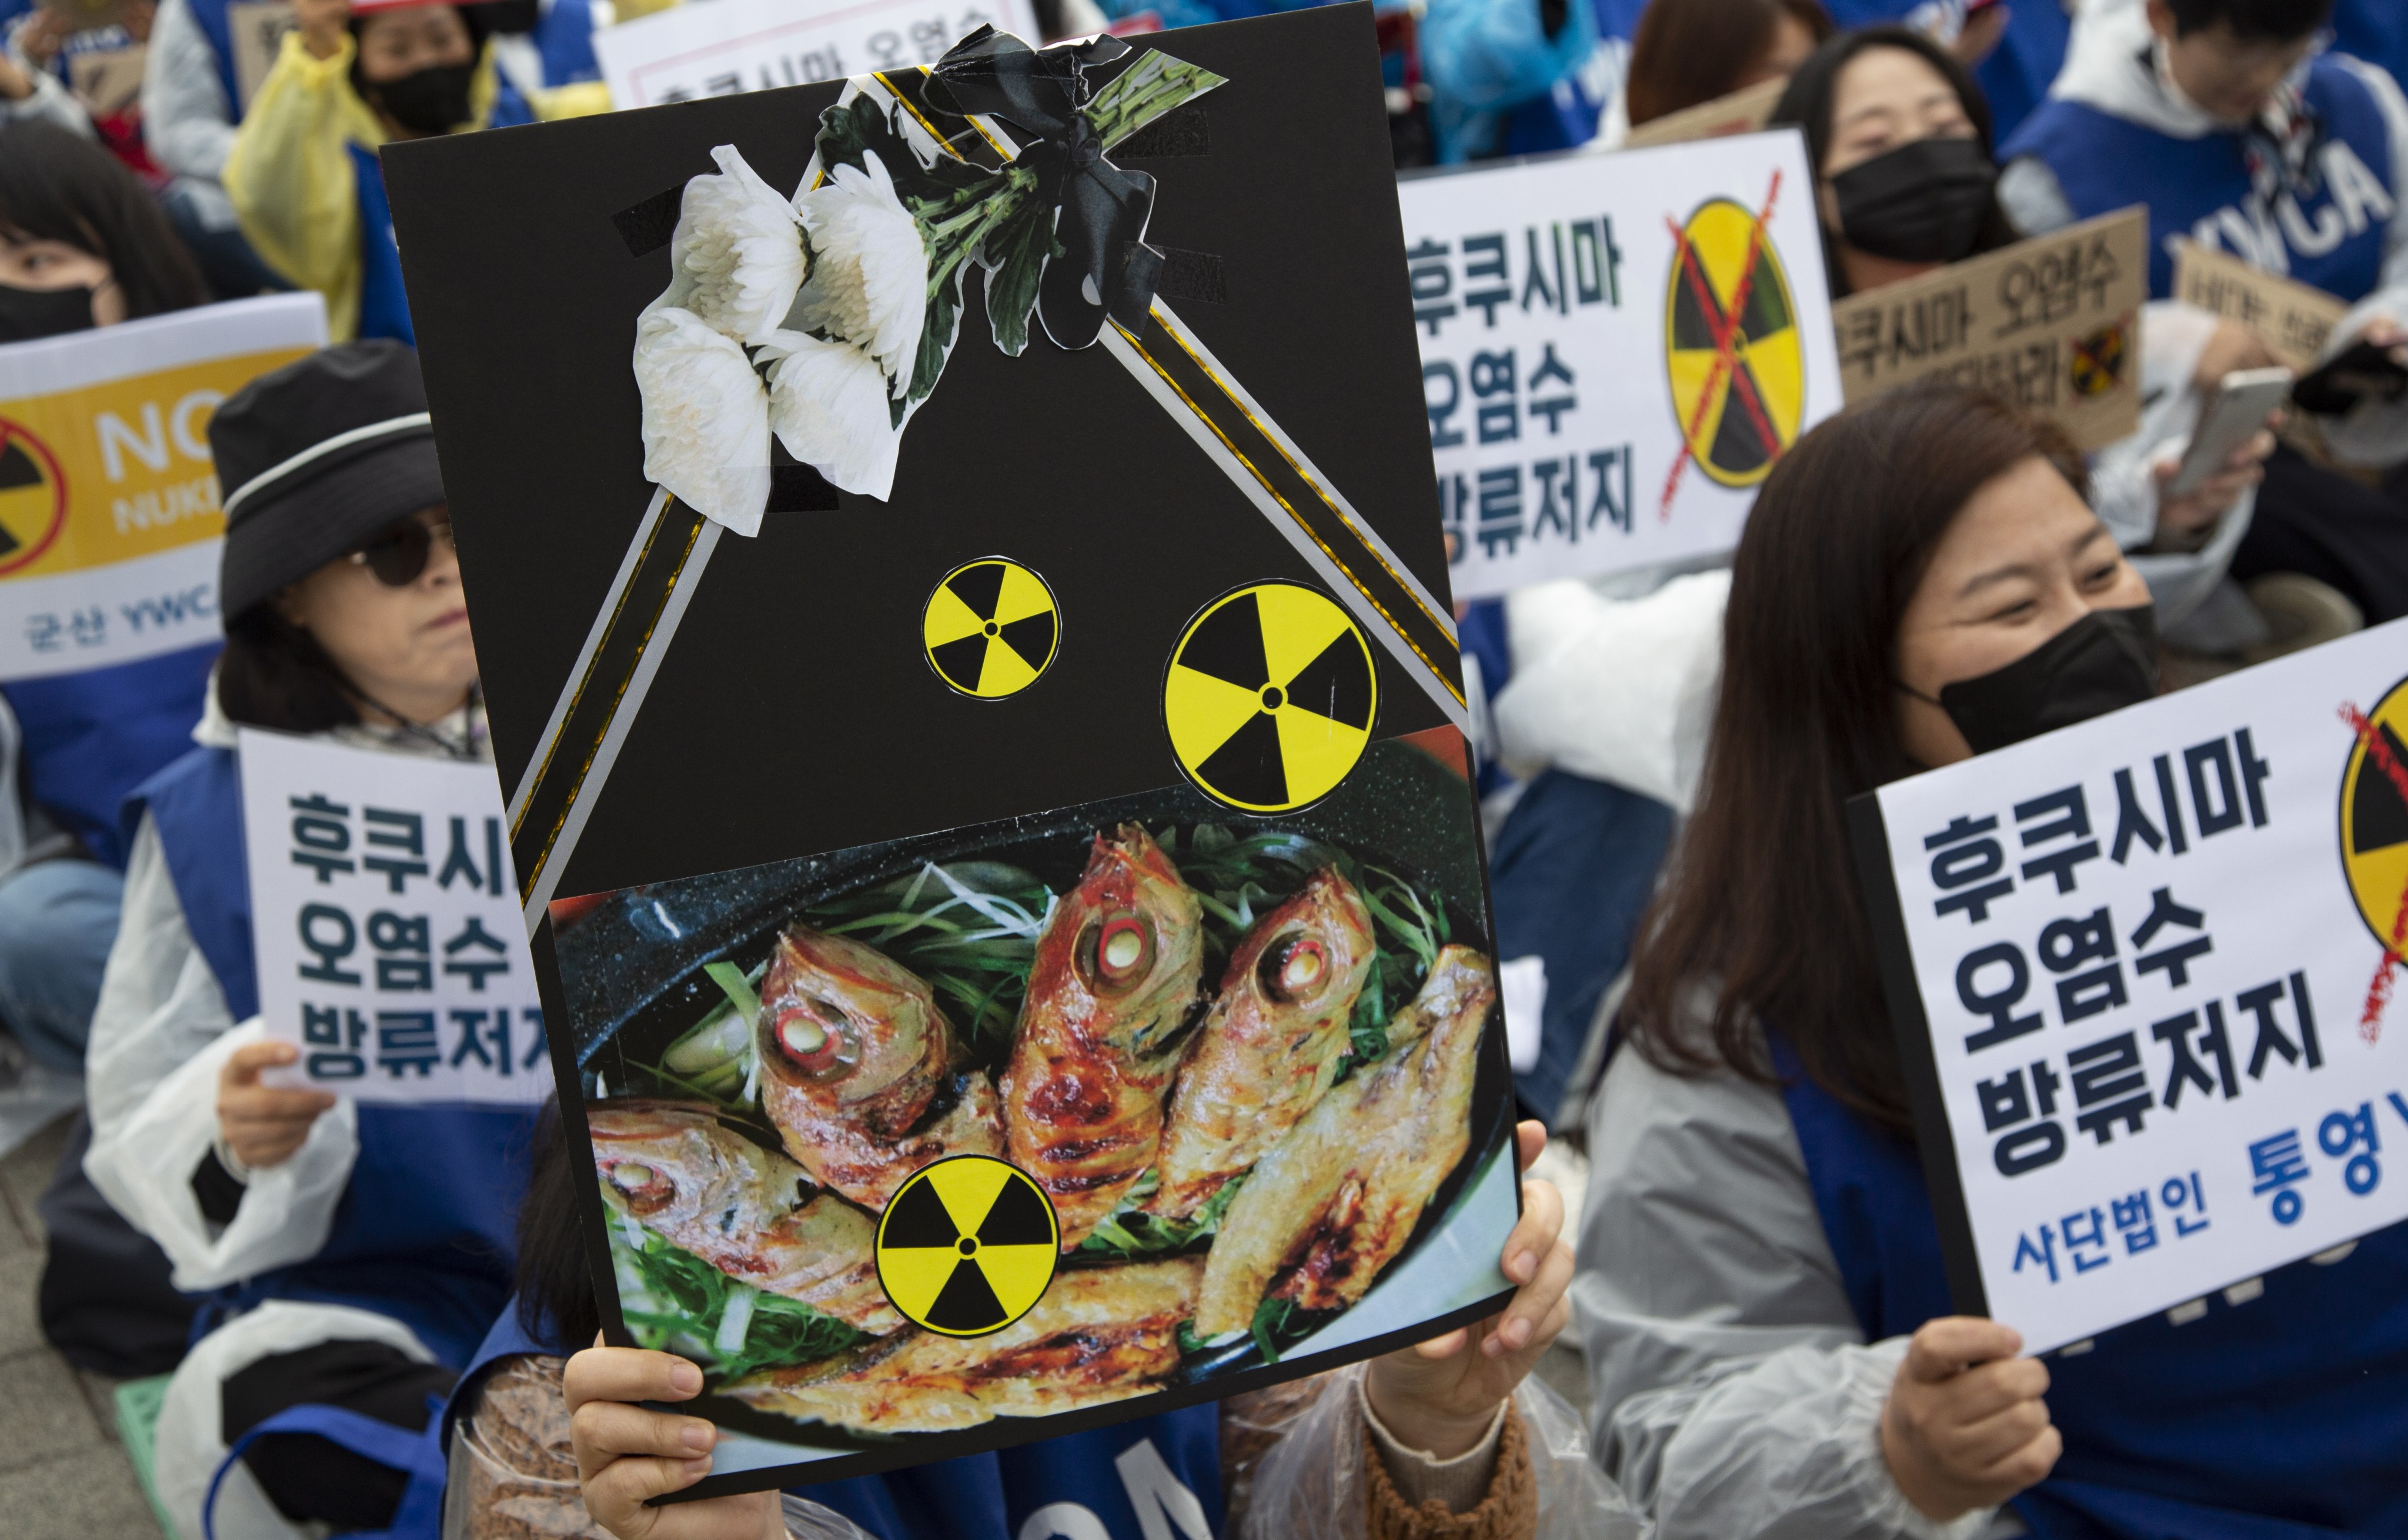 Members of the Young Women’s Christian Association in Seoul hold banners reading “No Fukushima radioactive water”. Photo: EPA-EFE